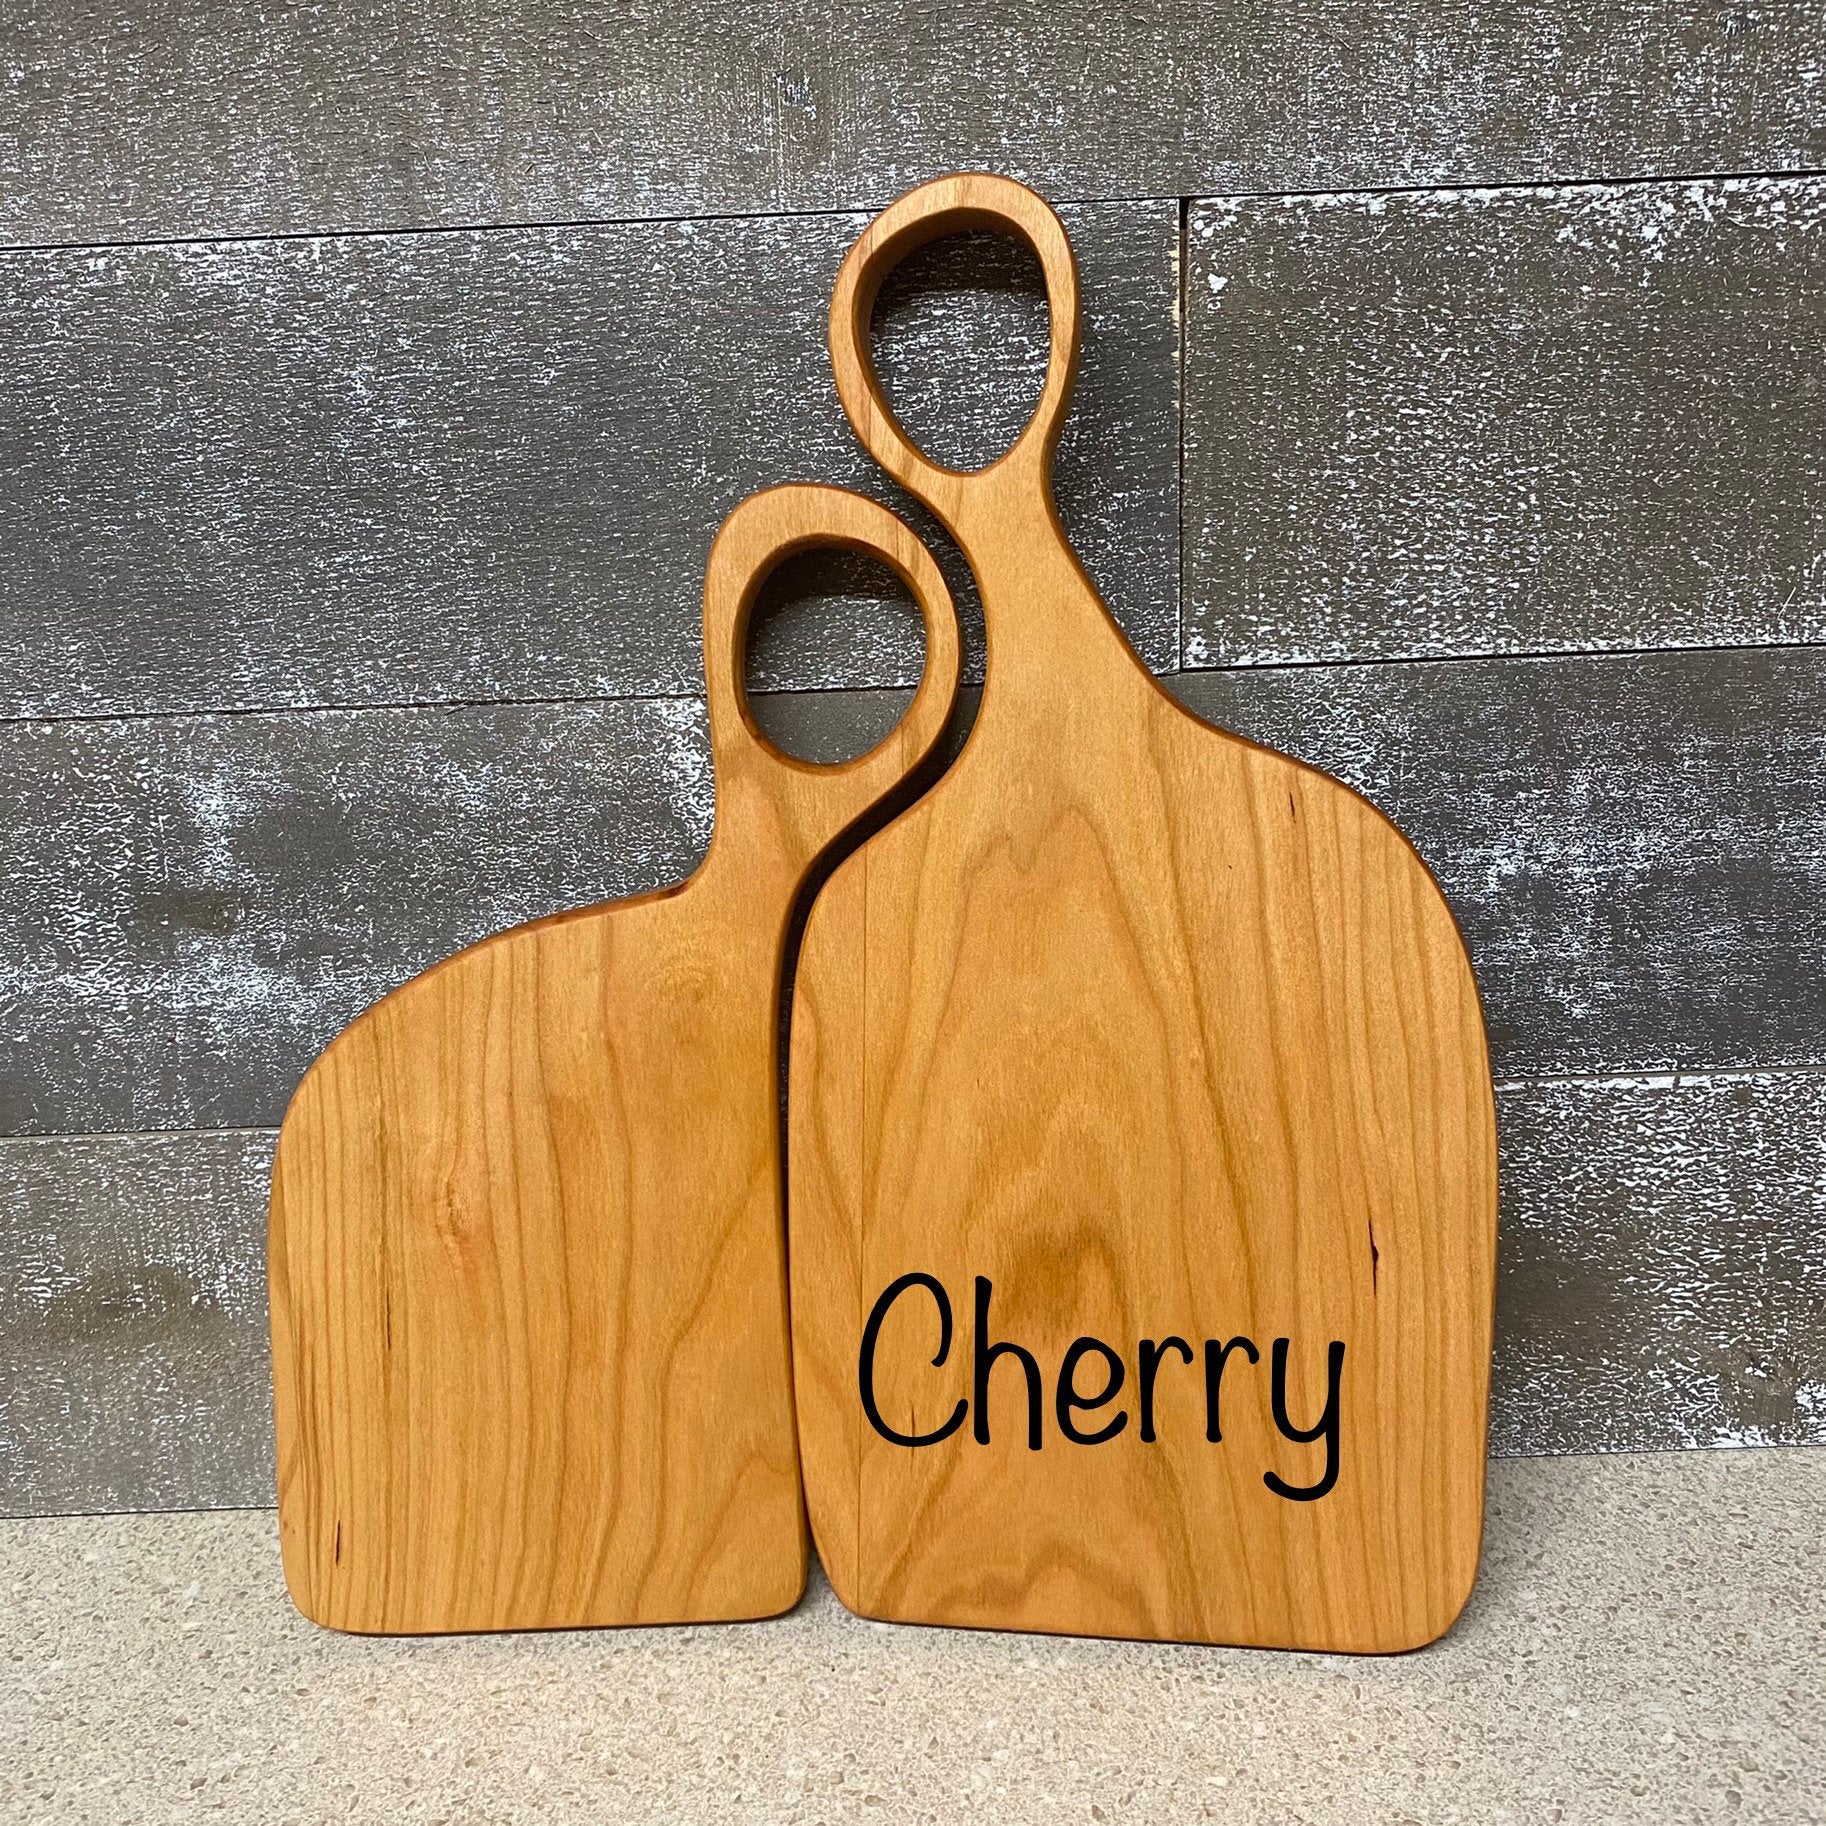 Romeo and Juliet Nesting Cutting Board Set His and Hers American